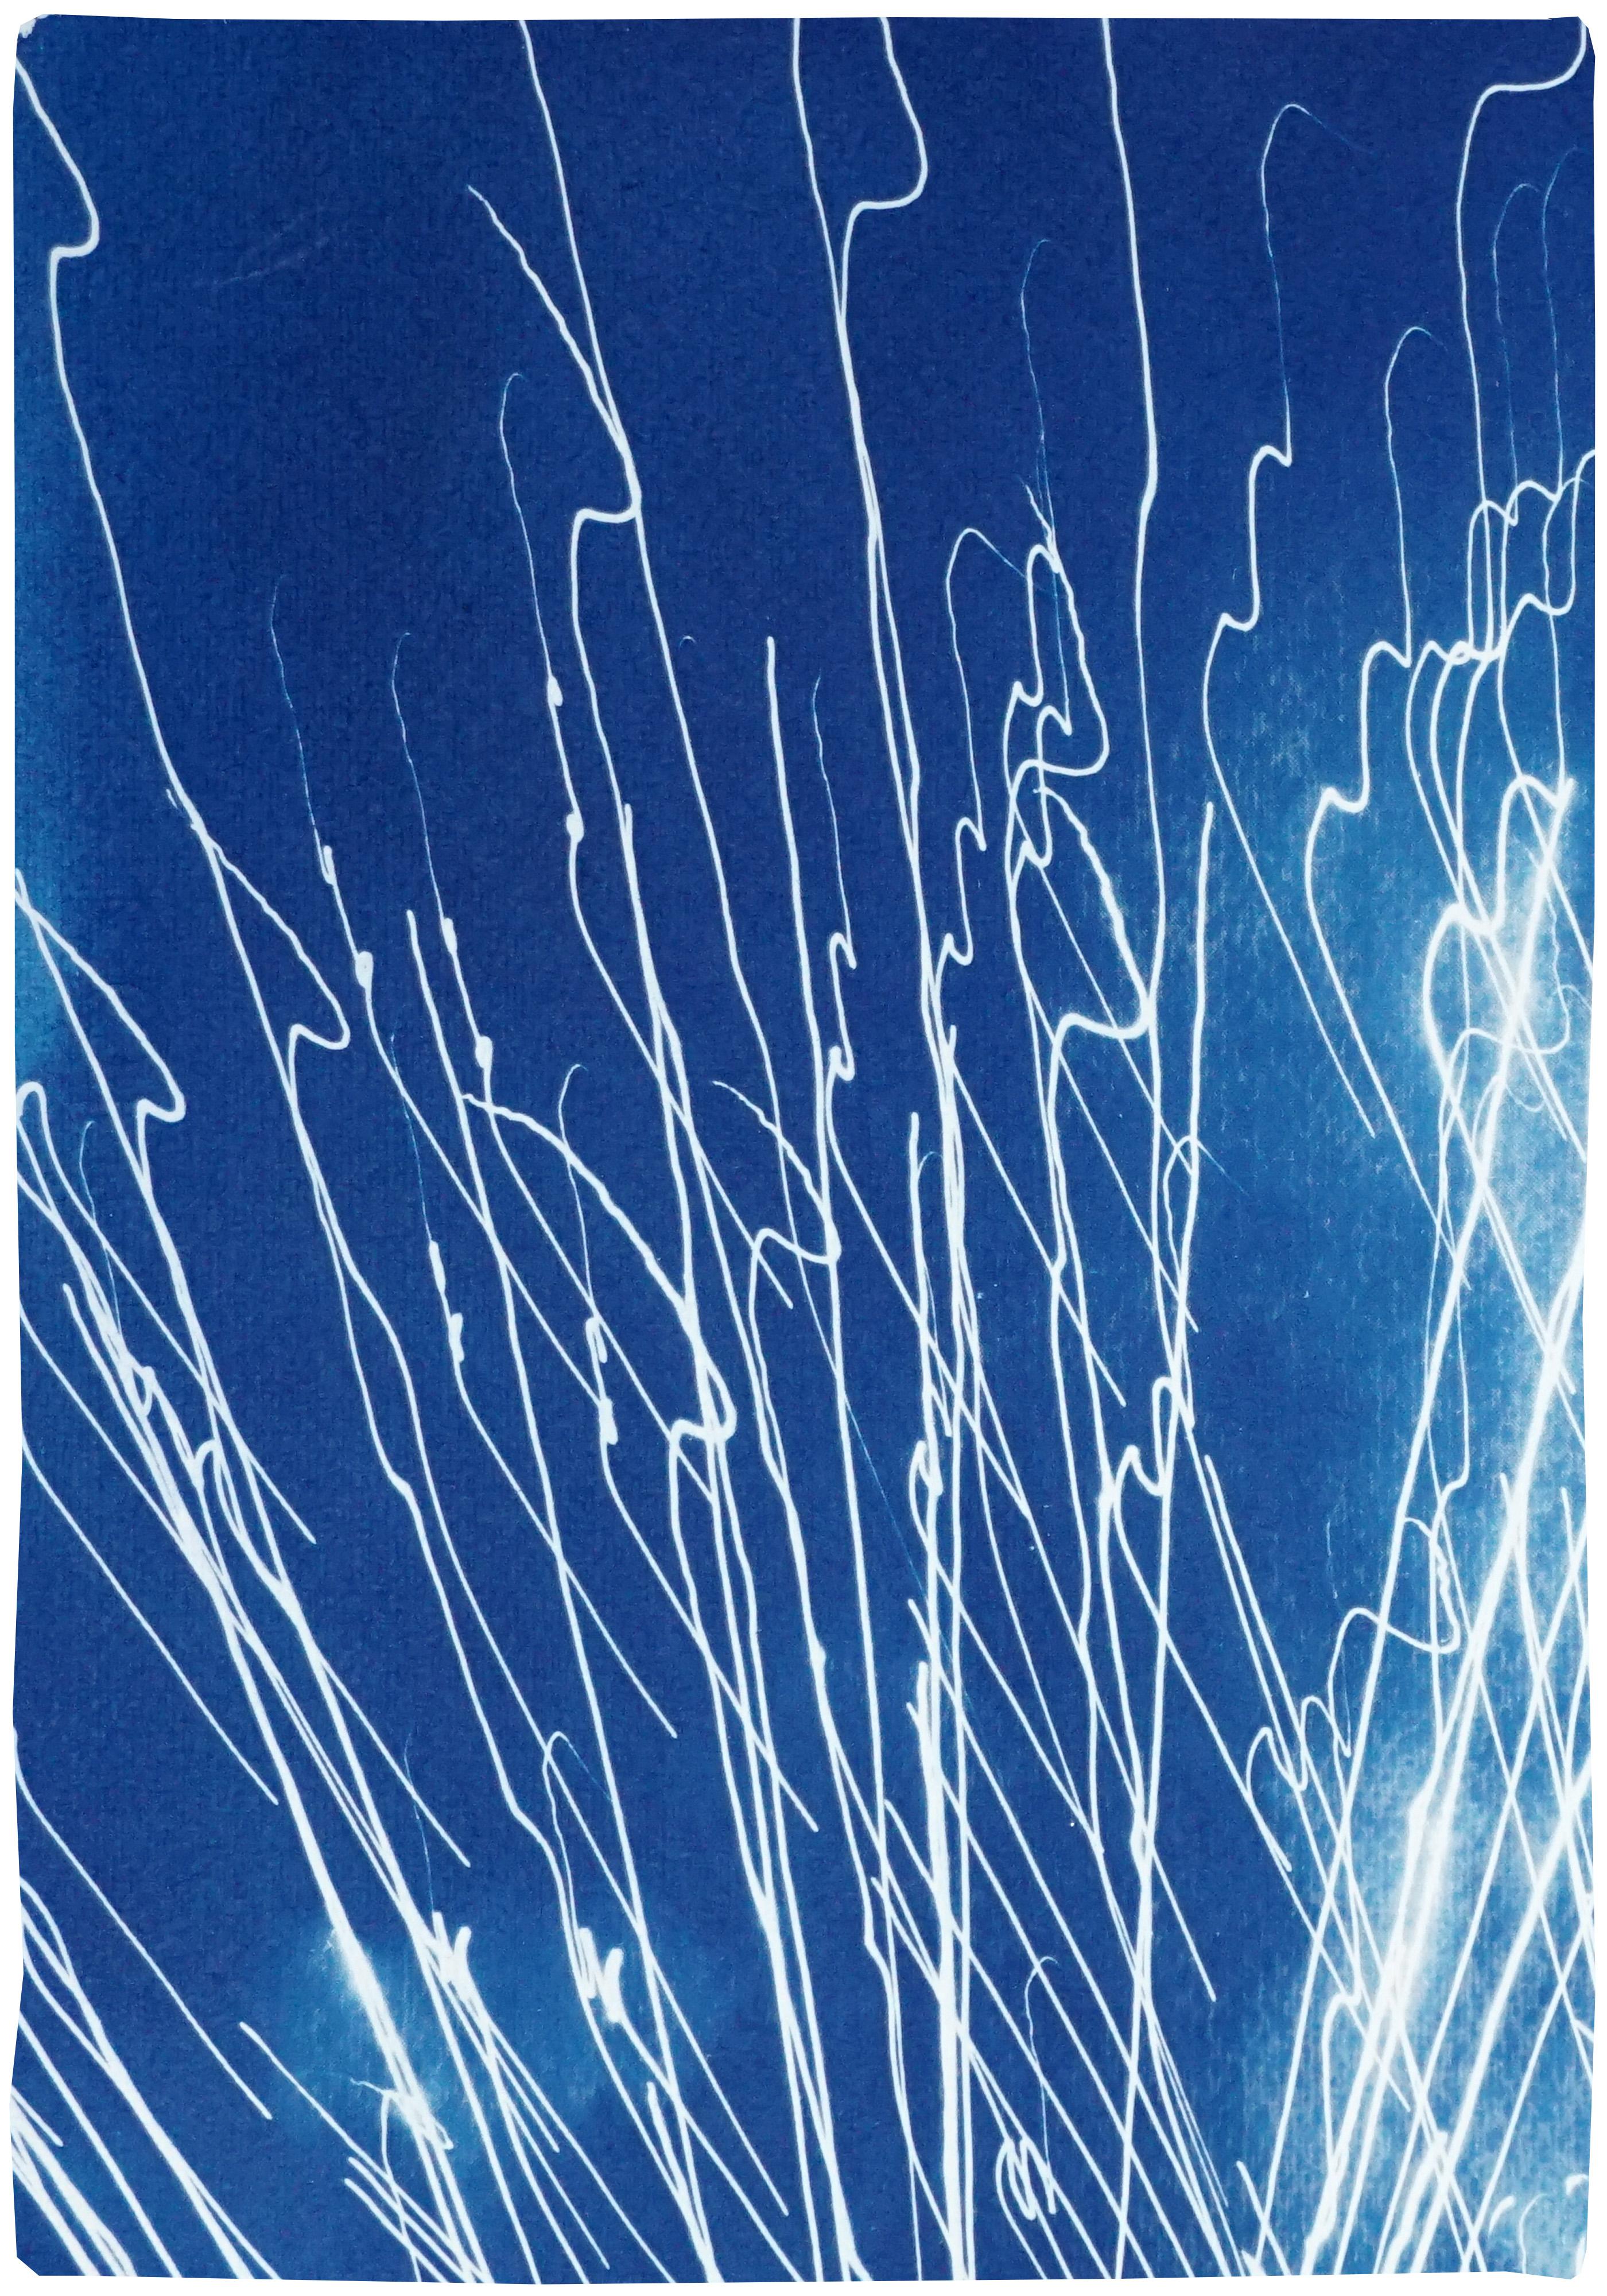 This is an exclusive handprinted limited edition cyanotype.

